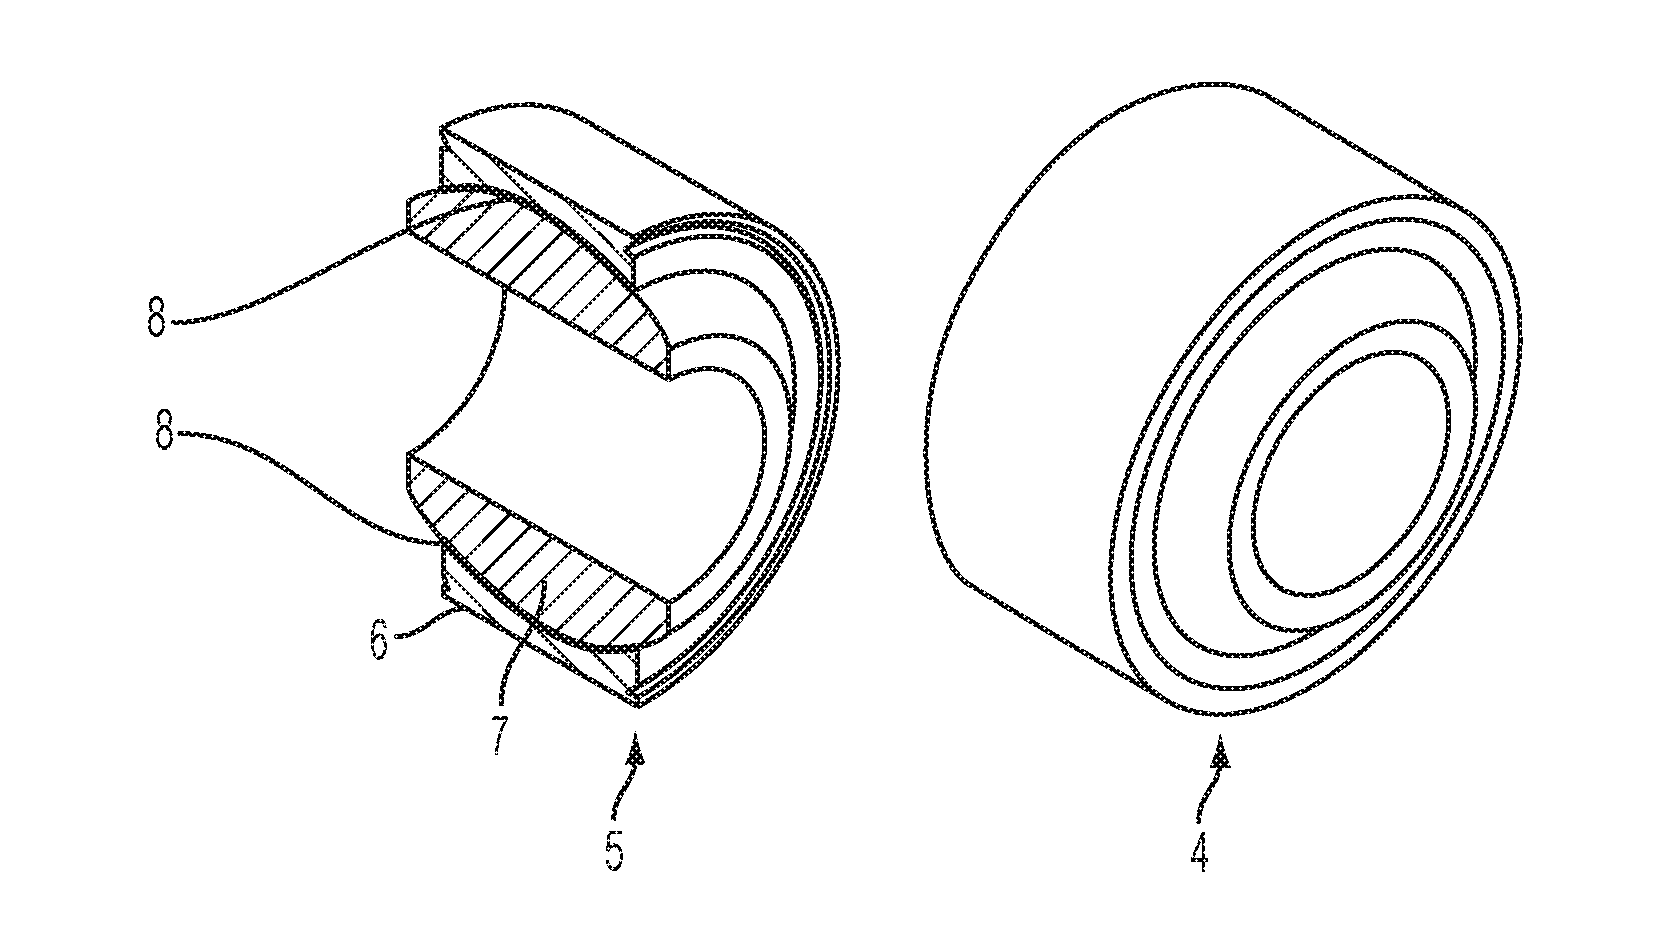 Self-lubricated bearing compositions and methods of making the same